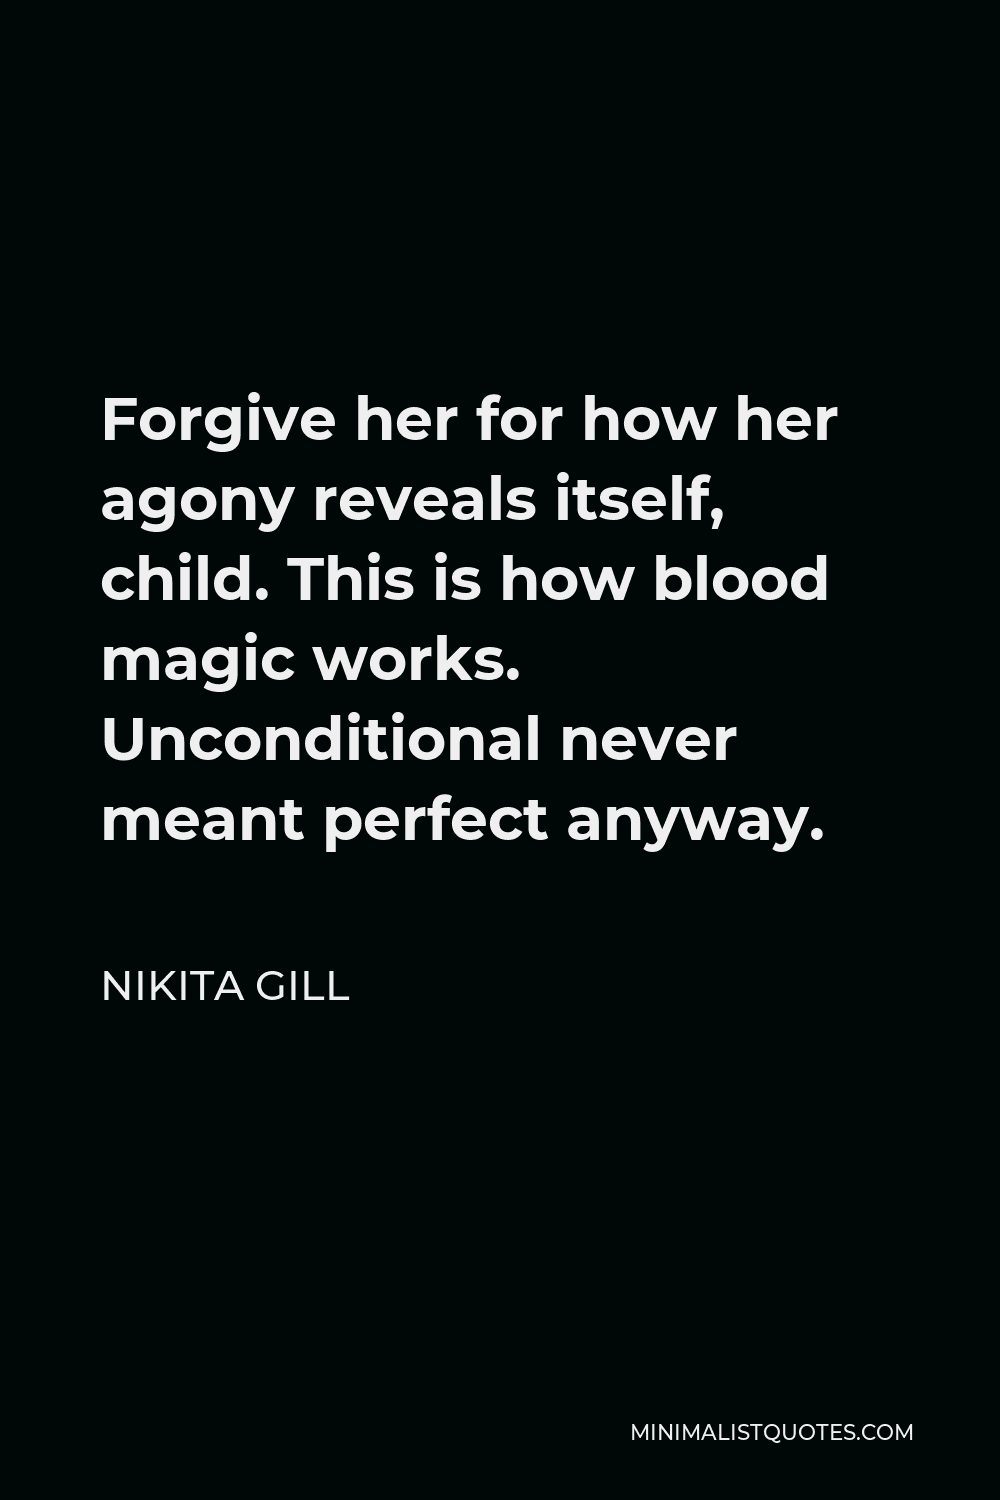 Nikita Gill Quote - Forgive her for how her agony reveals itself, child. This is how blood magic works. Unconditional never meant perfect anyway.